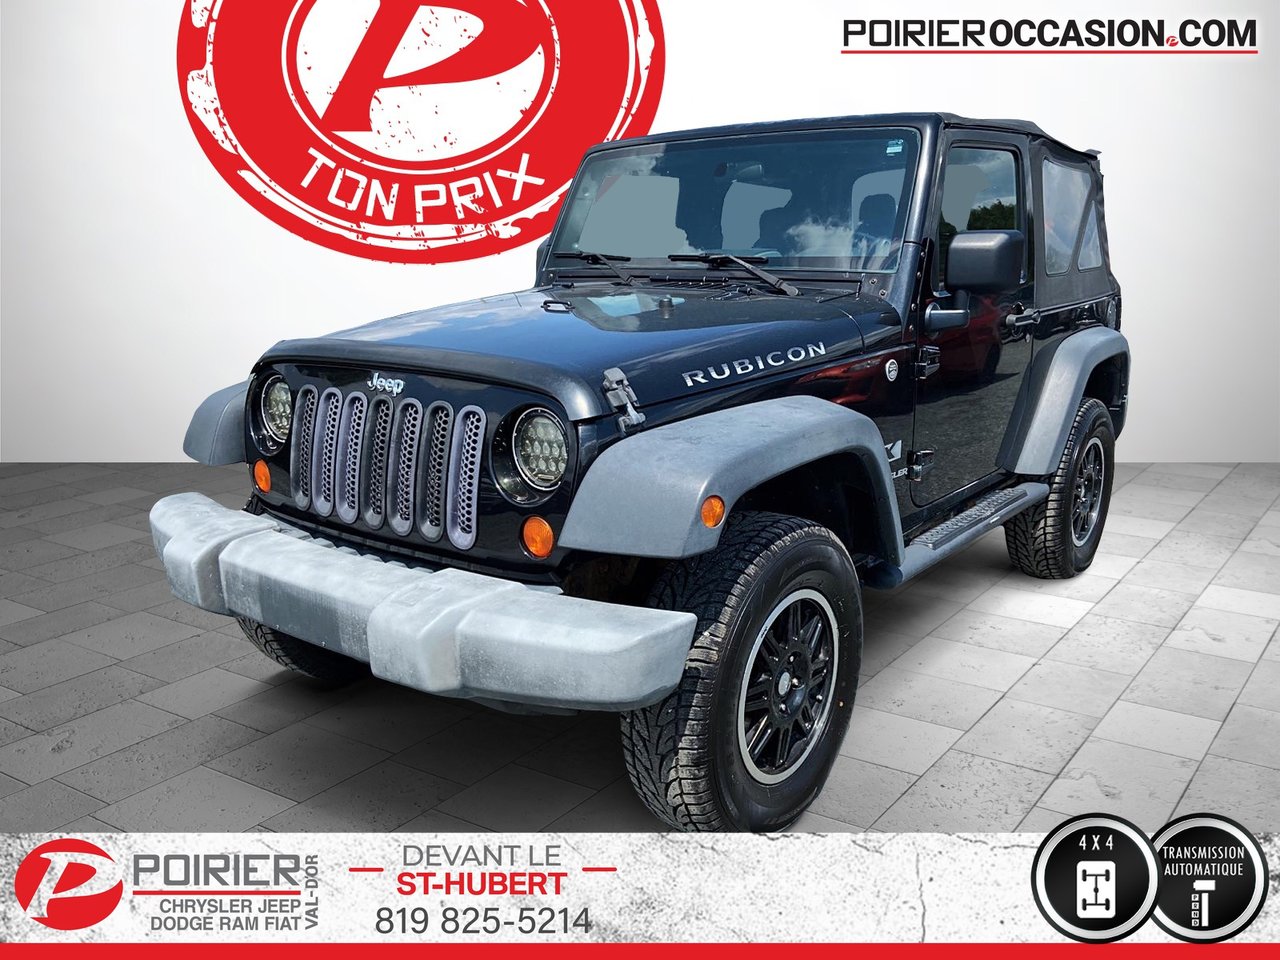 Used 2007 Jeep Wrangler with 151,343 km for sale at Otogo